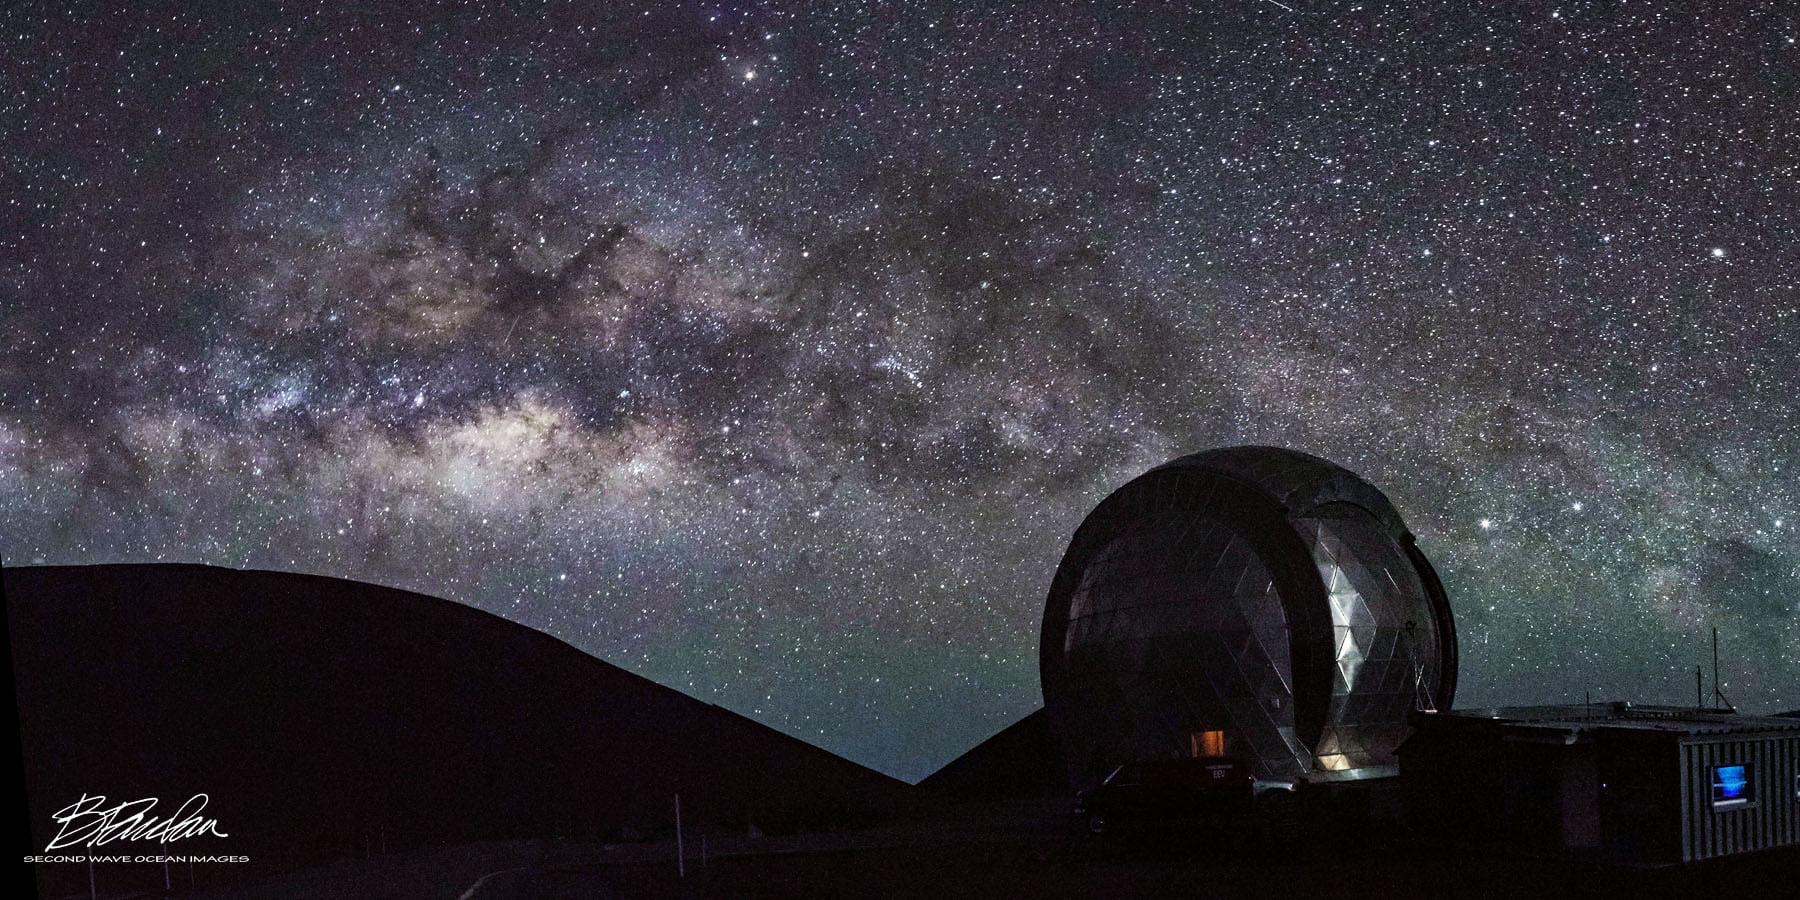 A brilliant and beautiful star field with Milky Way and a telescope dome and mountain hills silhouetted in the foreground